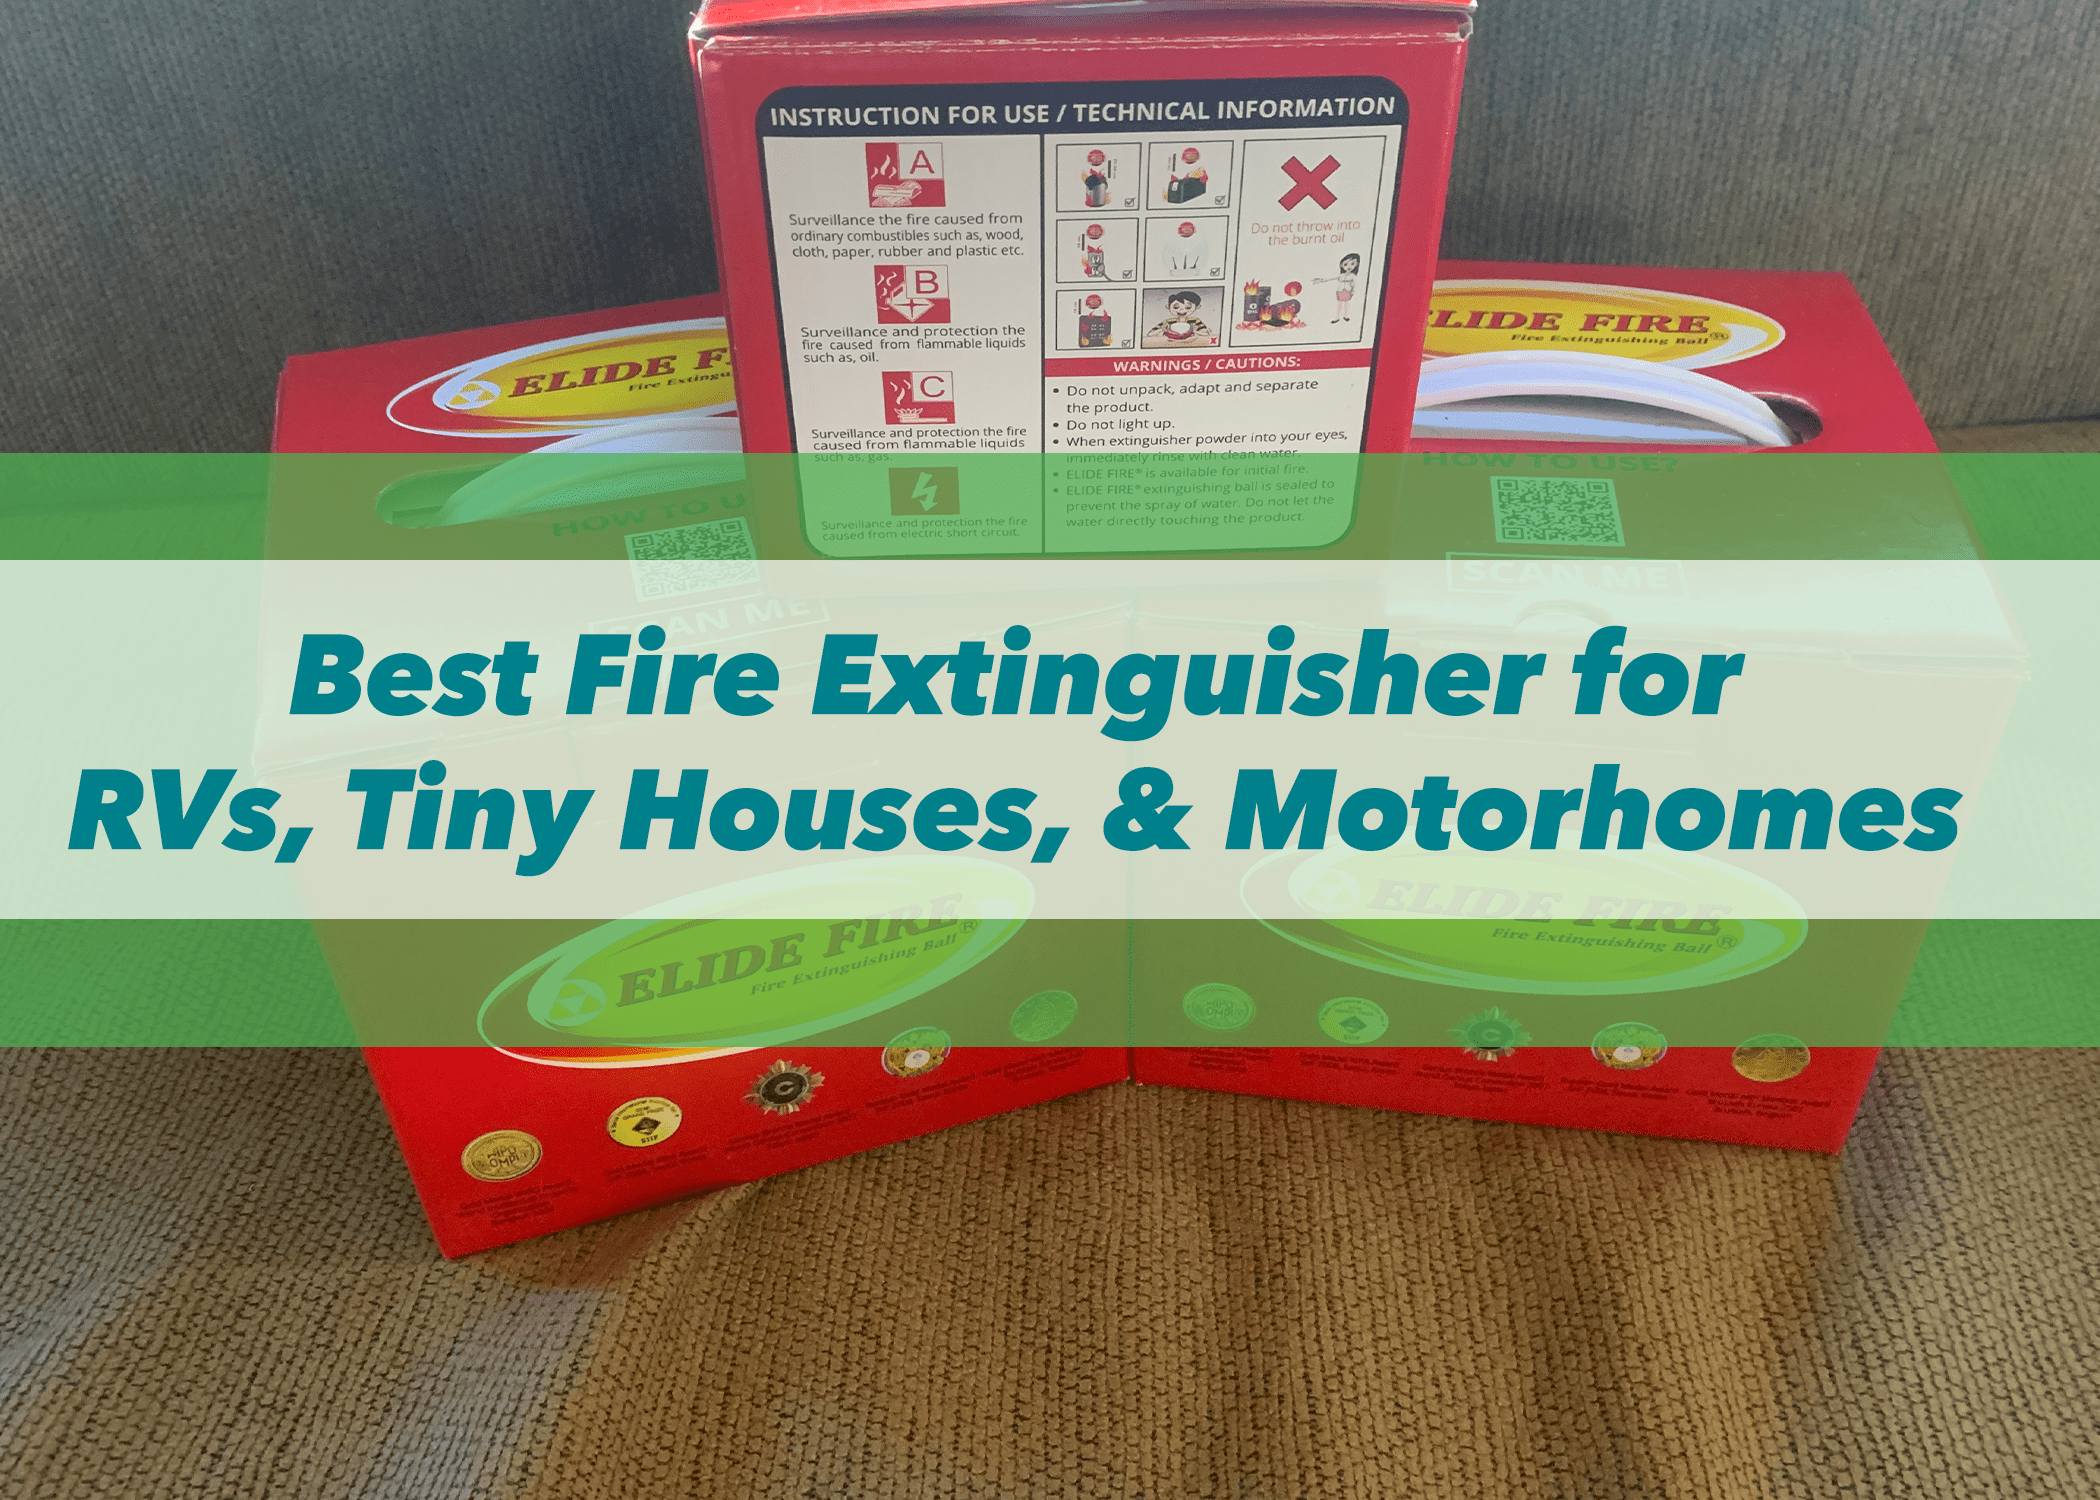 The Best Fire Extinguisher Balls for any RV, Travel Trailers